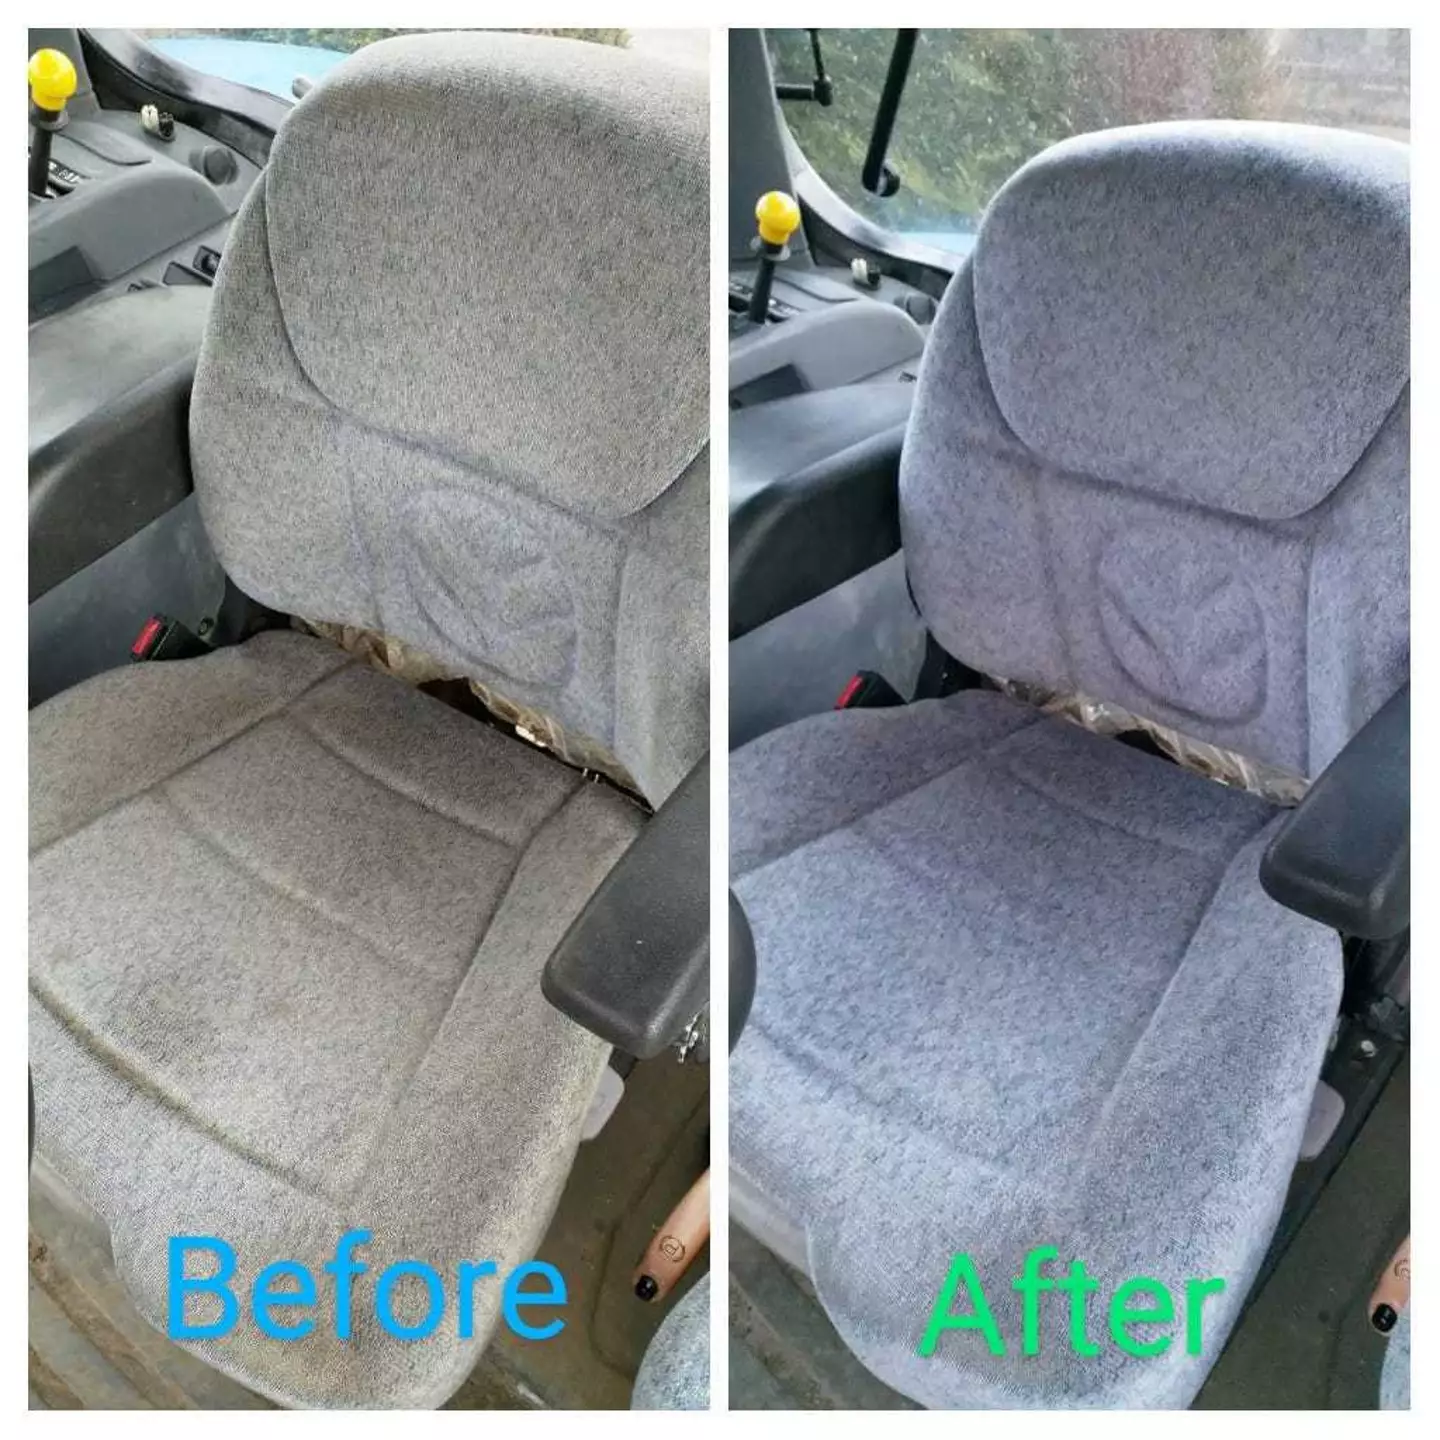 One woman used it to clean a tractor seat (